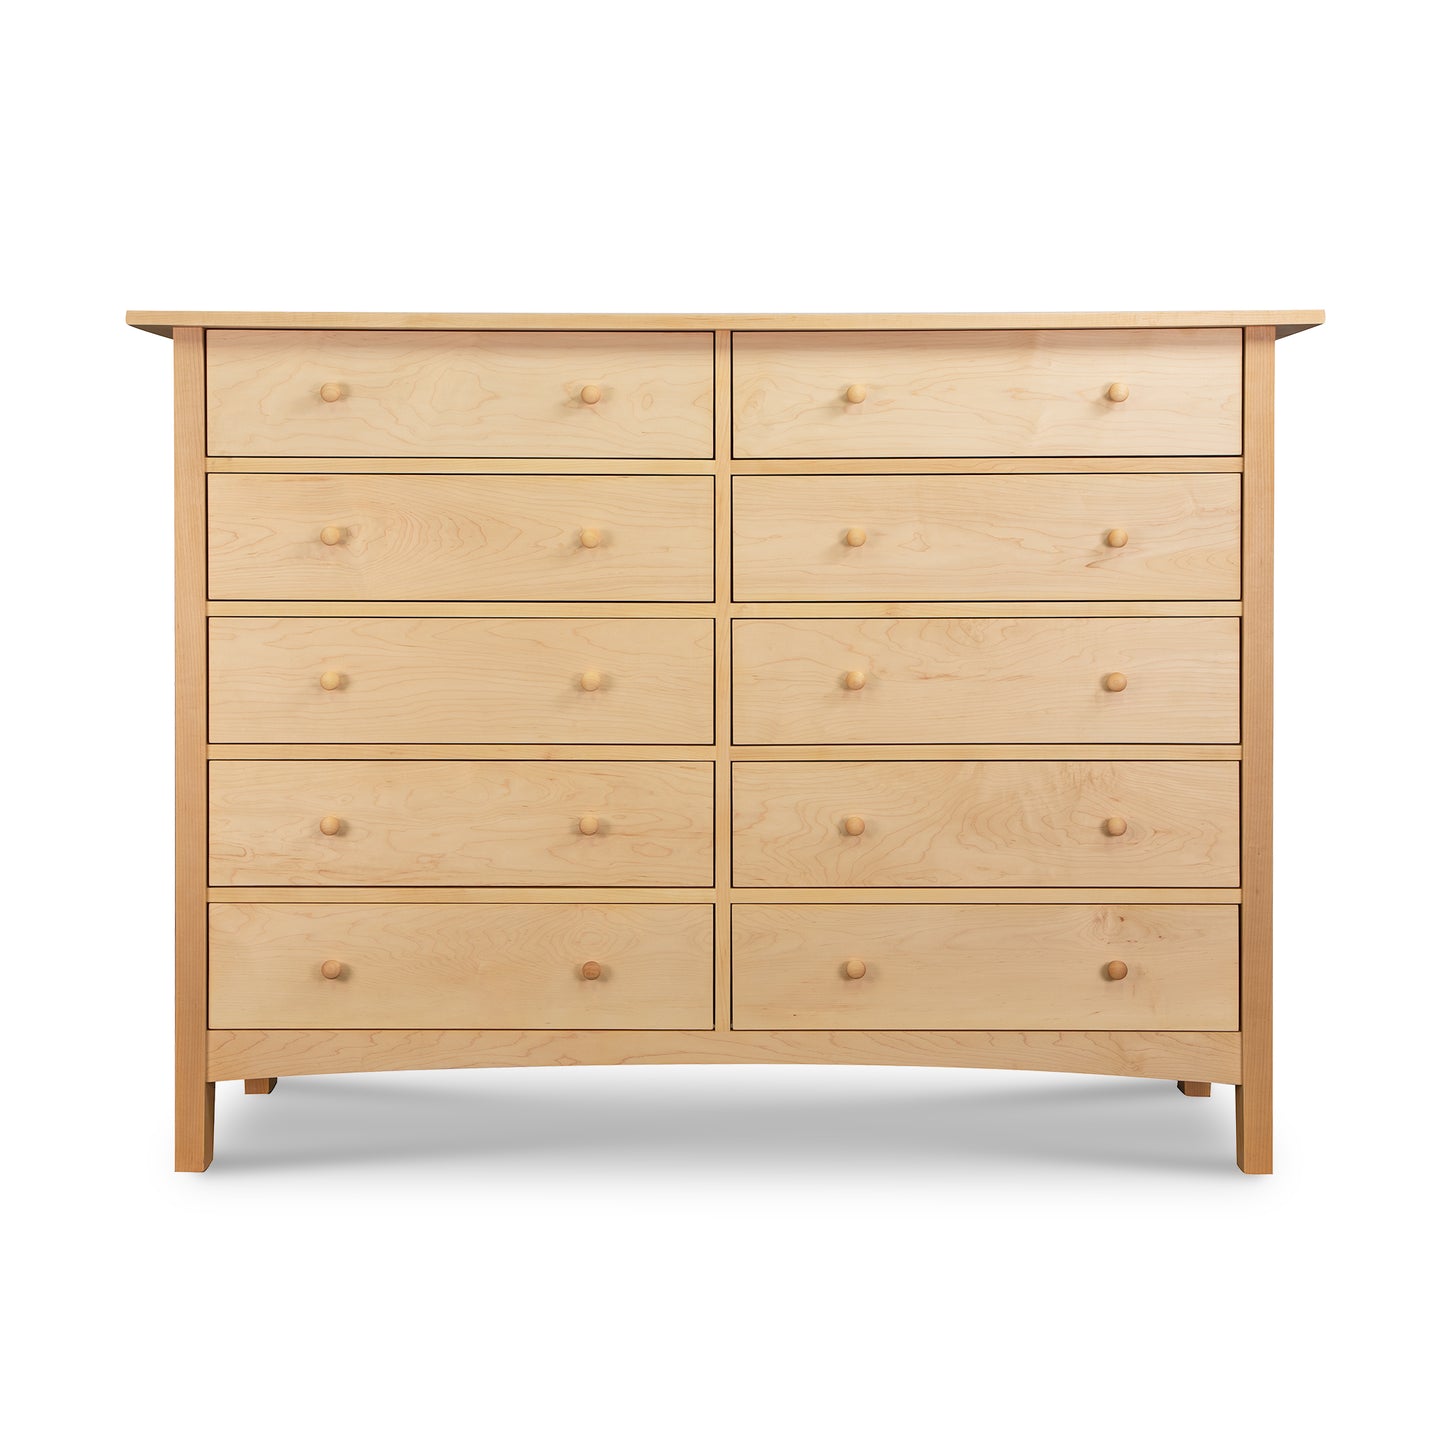 A Burlington Shaker 10-Drawer Dresser by Vermont Furniture Designs with multiple drawers organized in a 3x4 grid, against a white background.